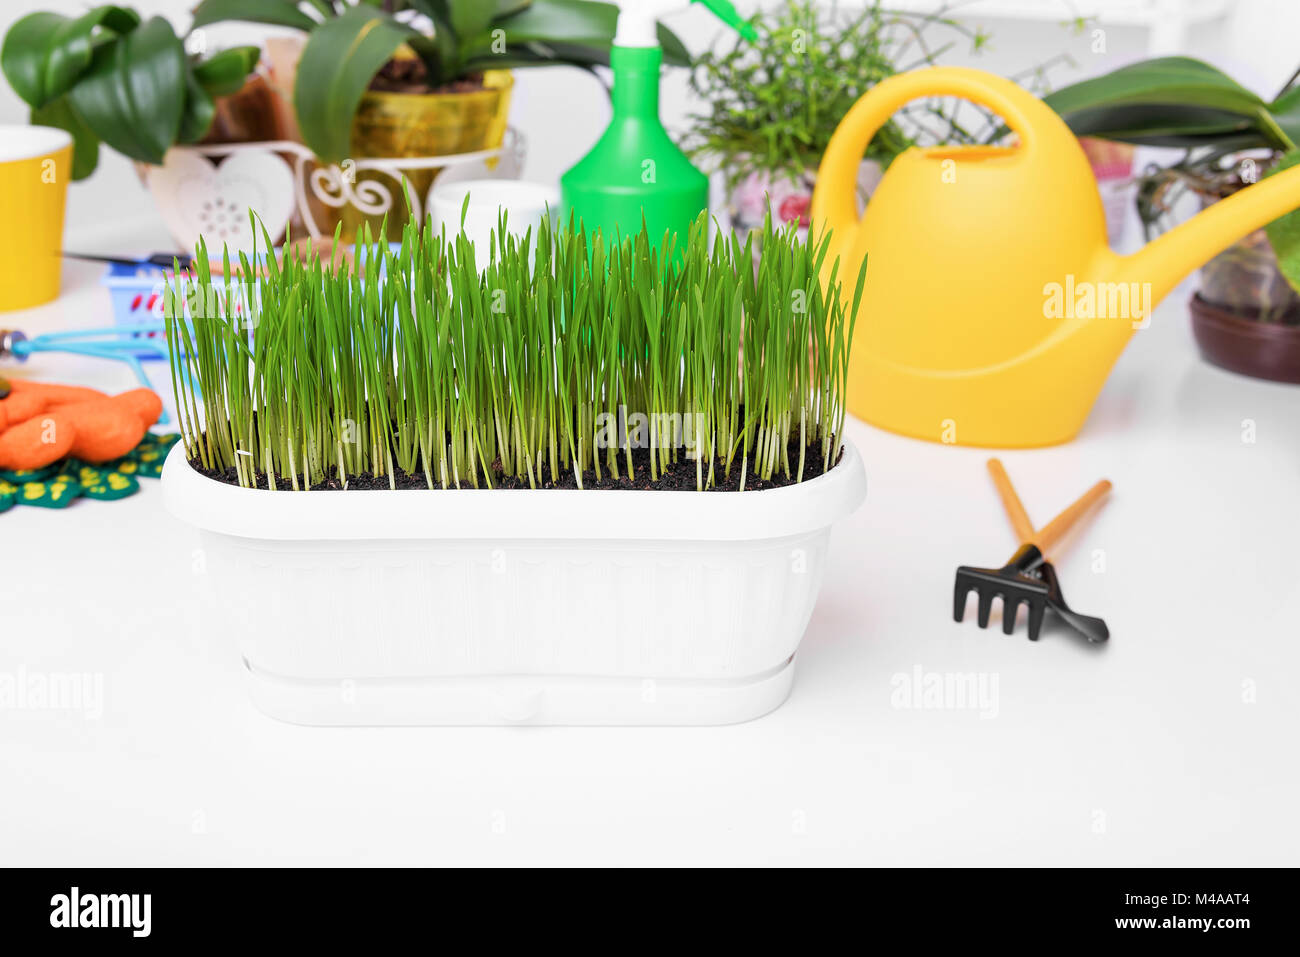 Green grass in a pot for flowers. Stock Photo